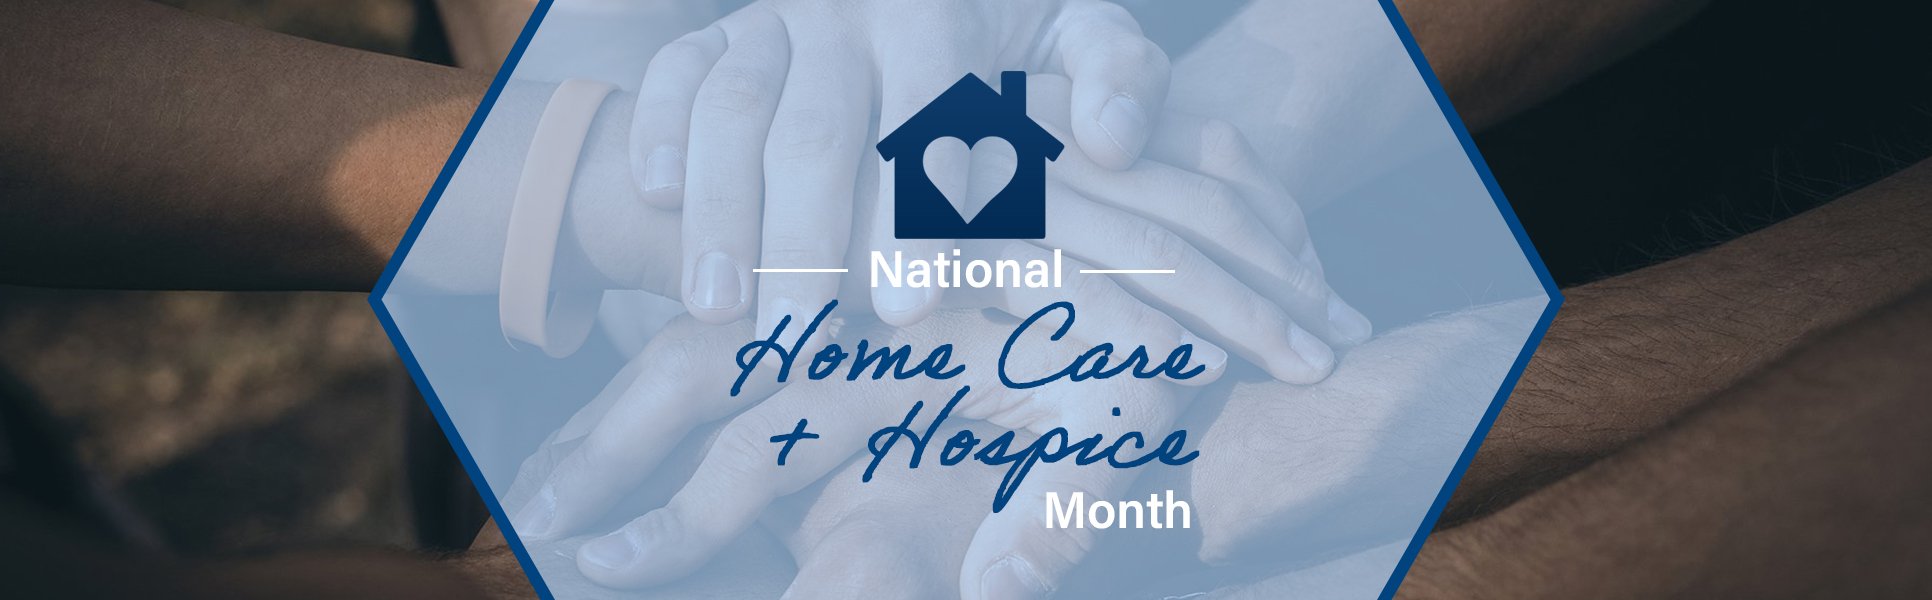 National Home Care and Hospice Month | DOHC